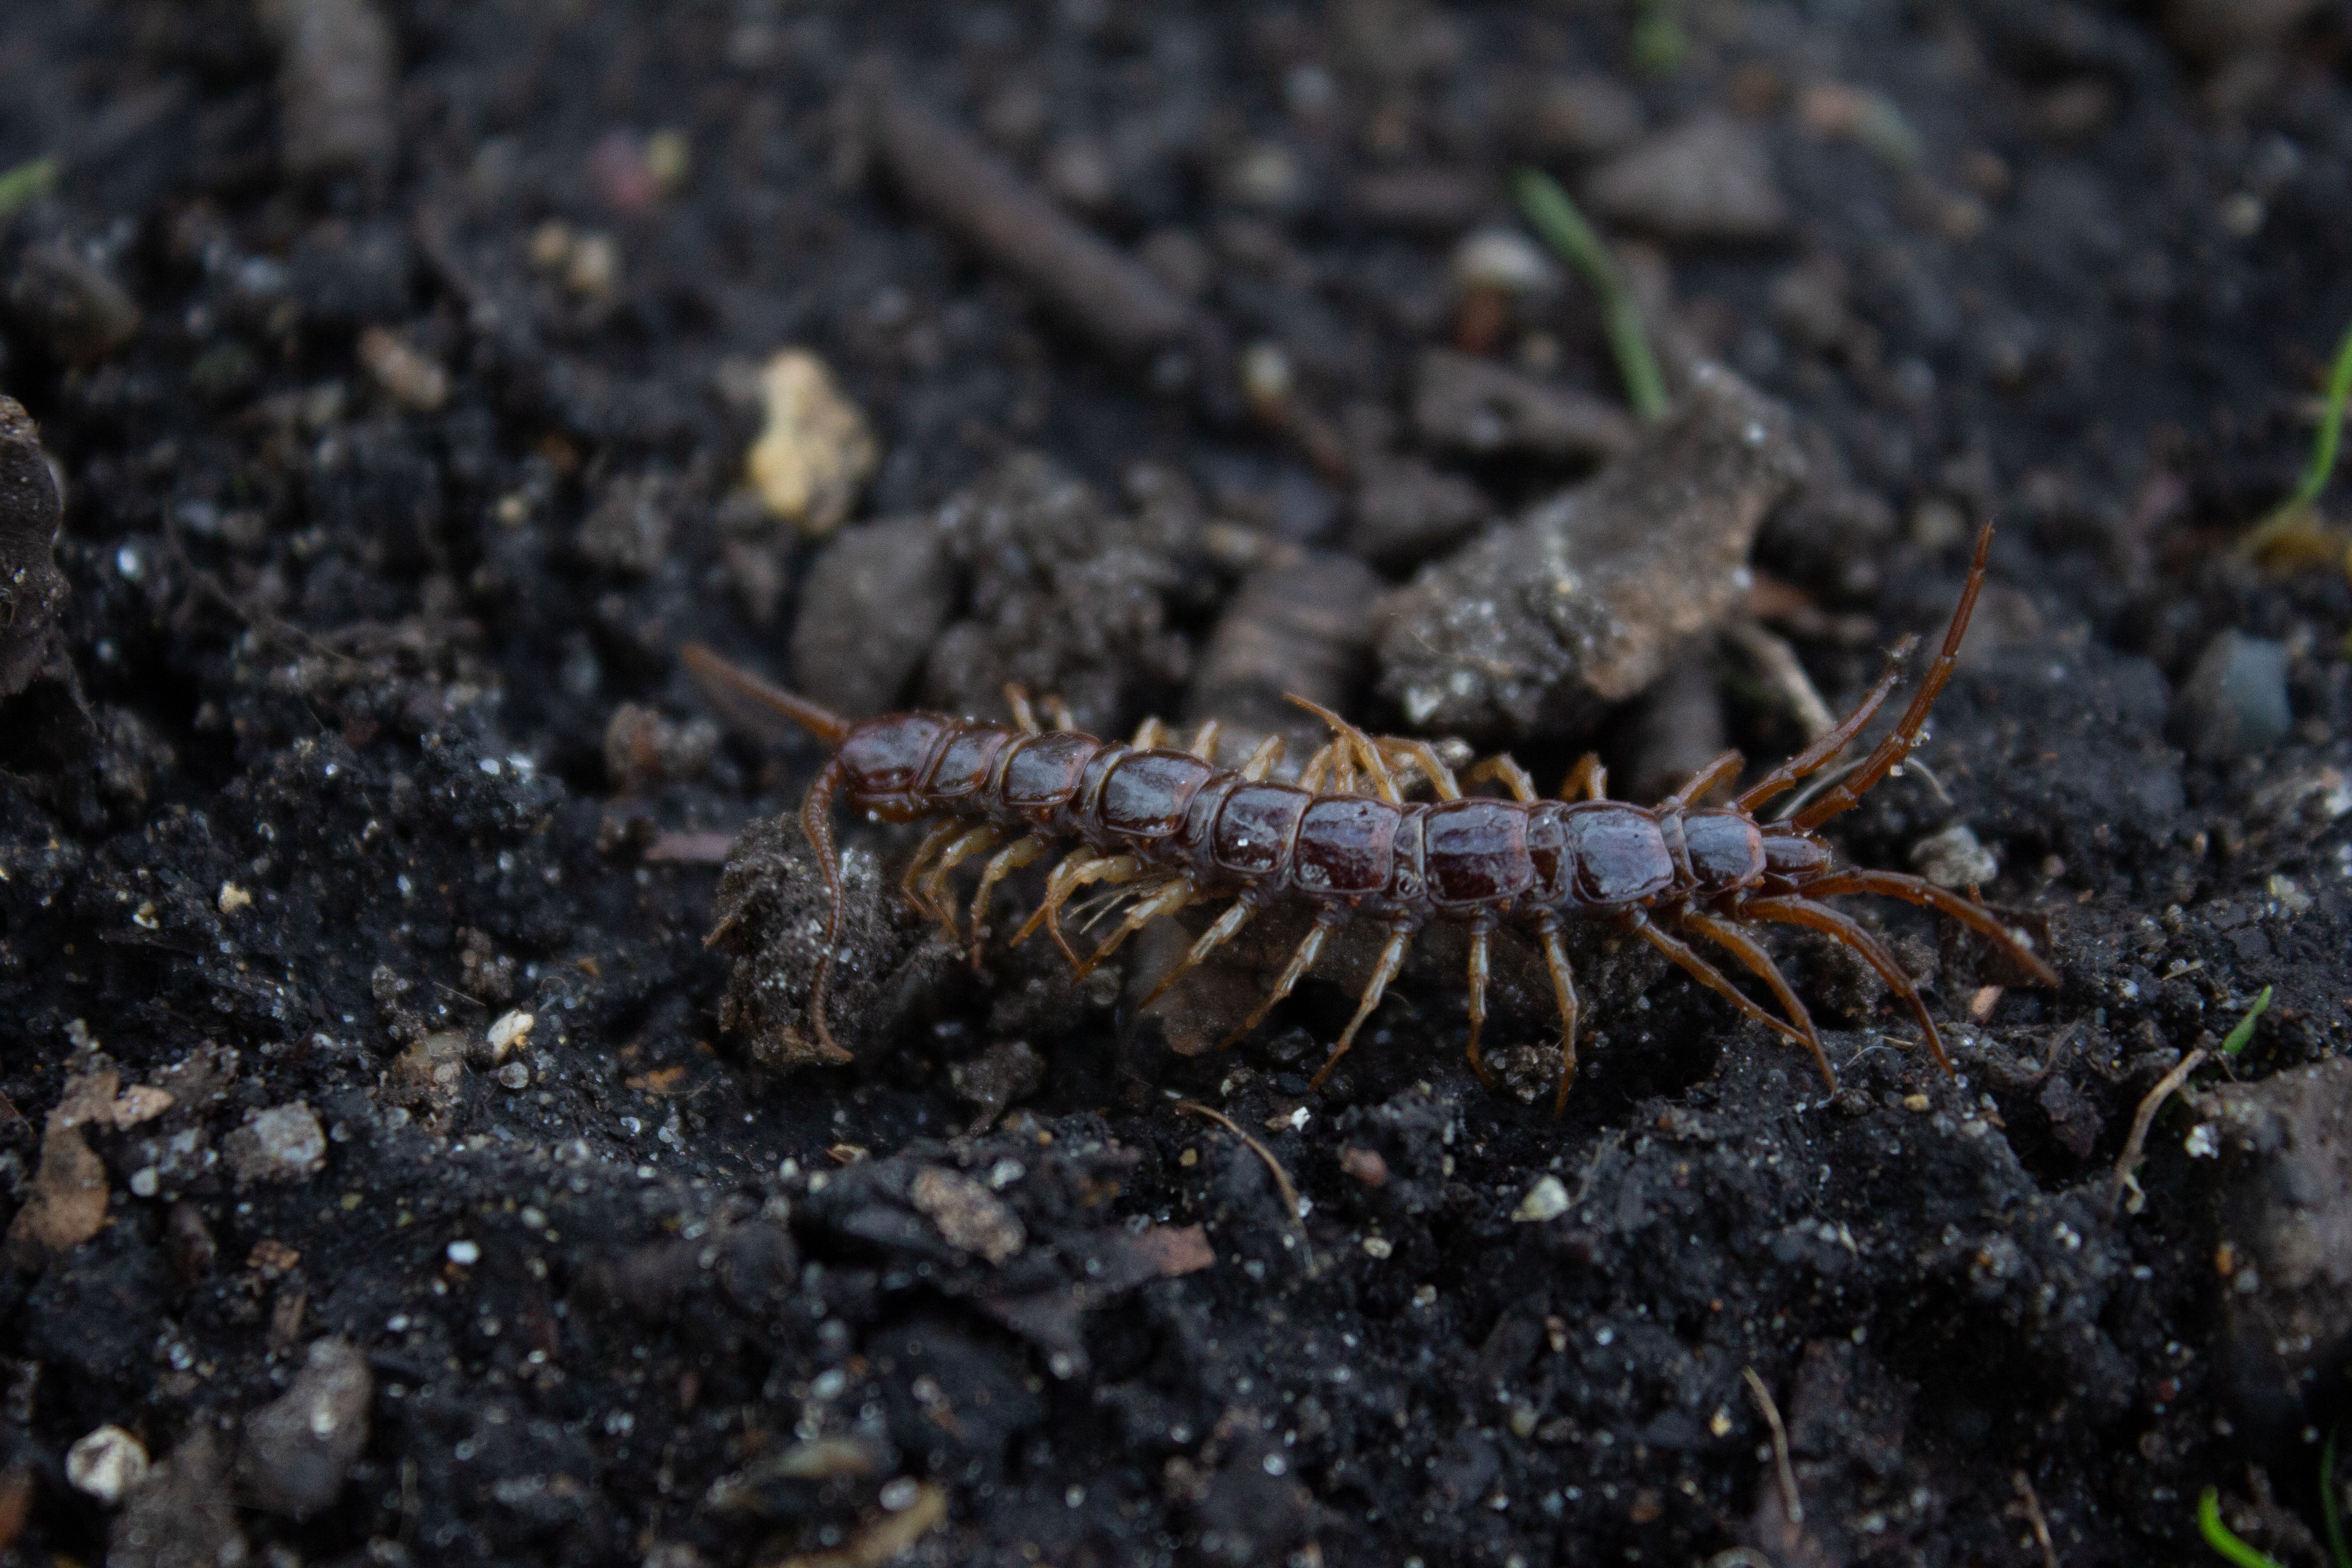 A Brown Stone Centipede Lithobius Forficatus Found Under A Piece Of Dead Wood In Hyde Park London